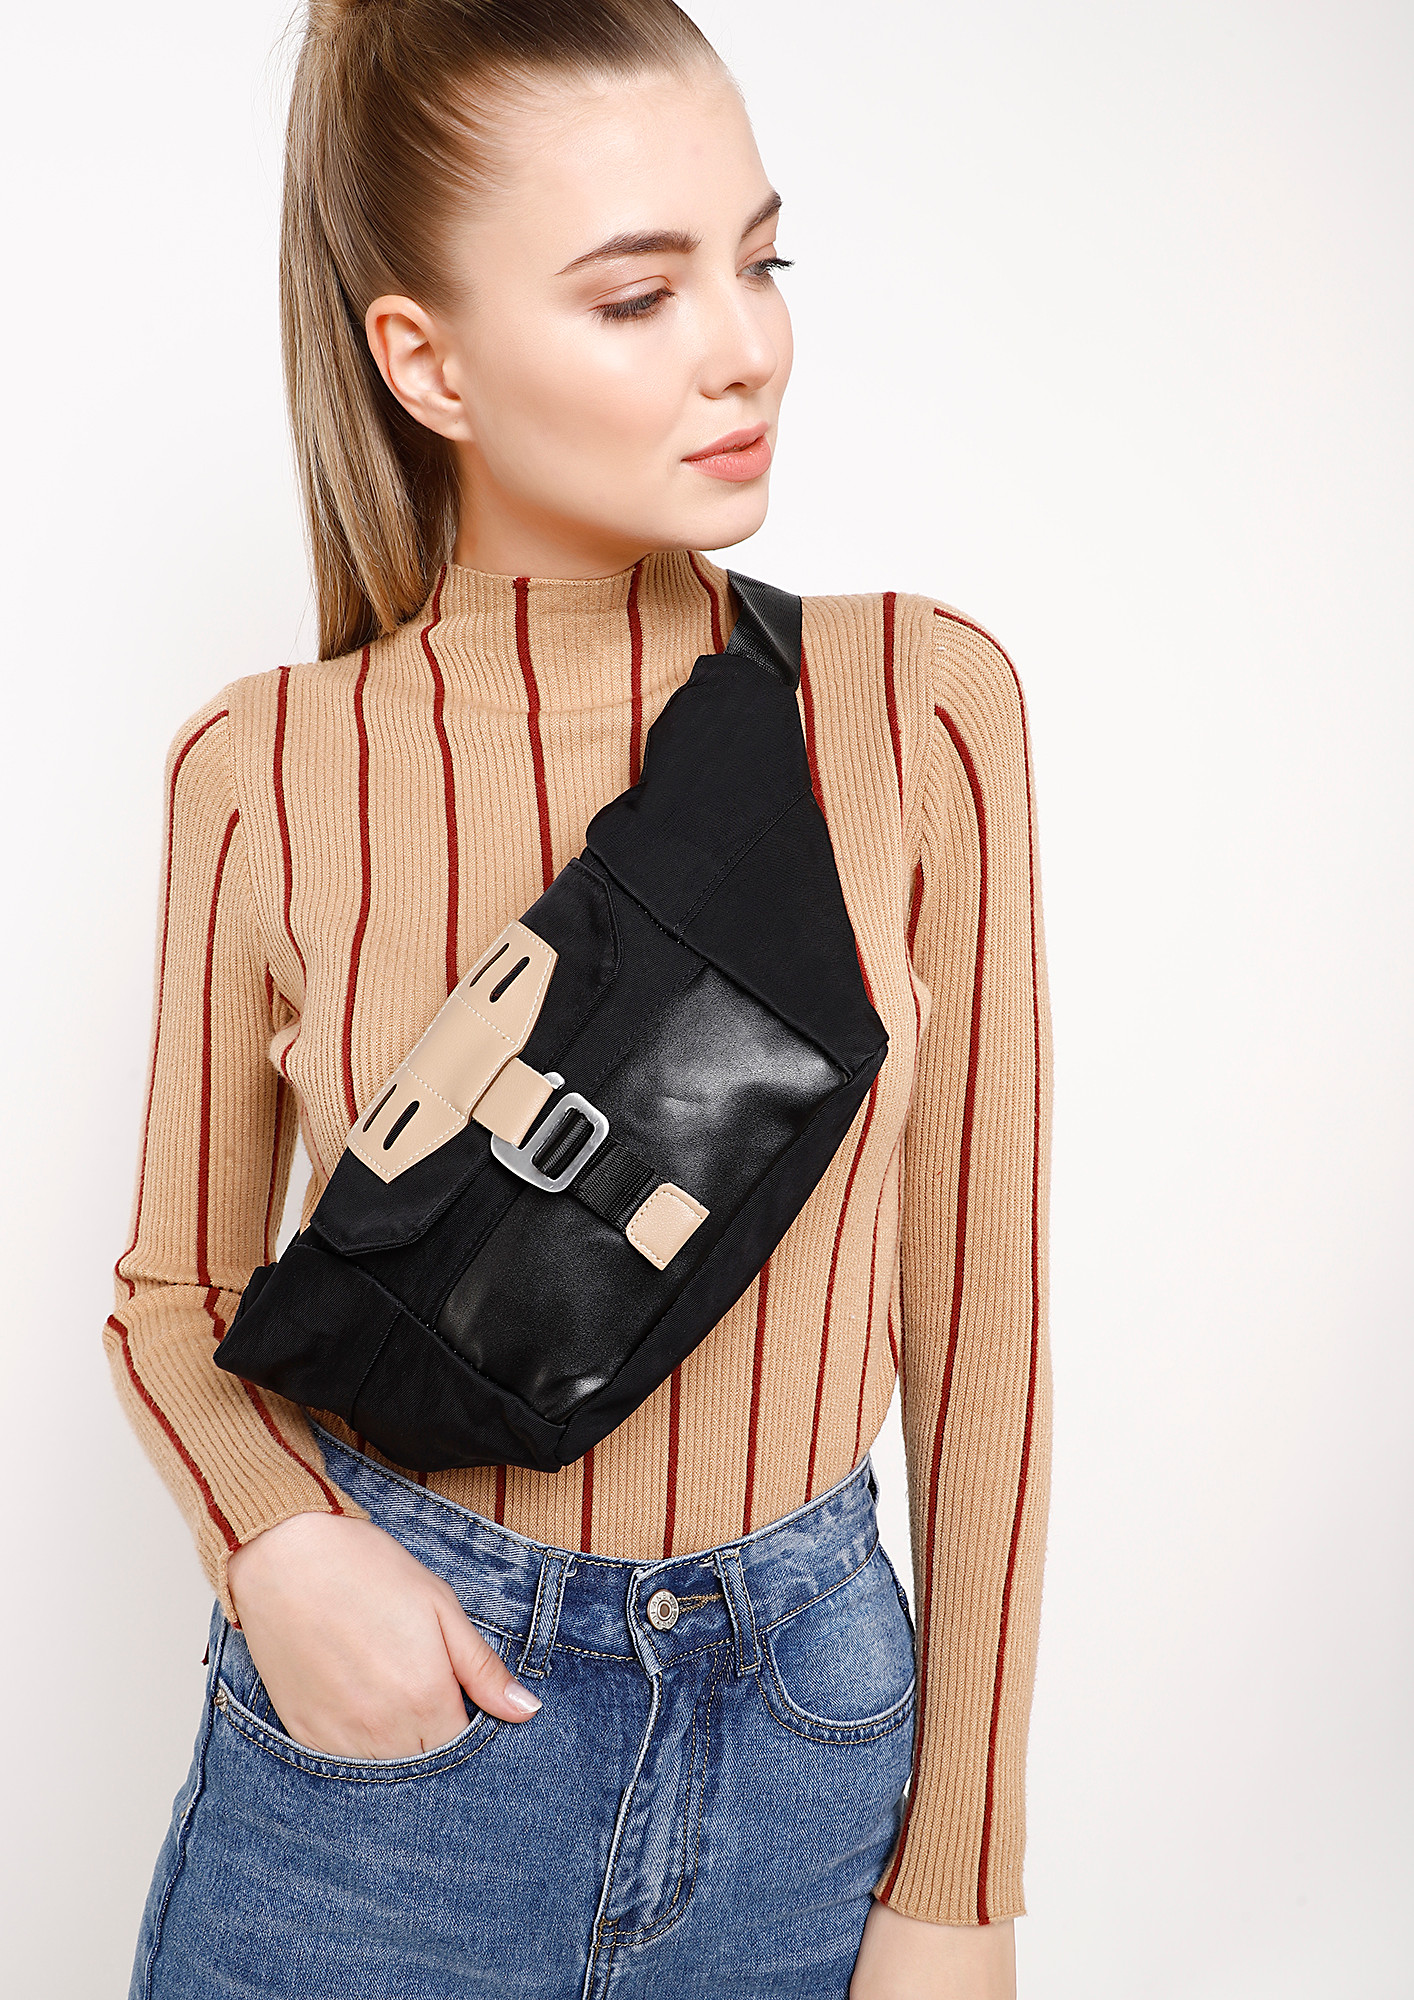 HOOKED ON YOU BLACK FANNY PACK